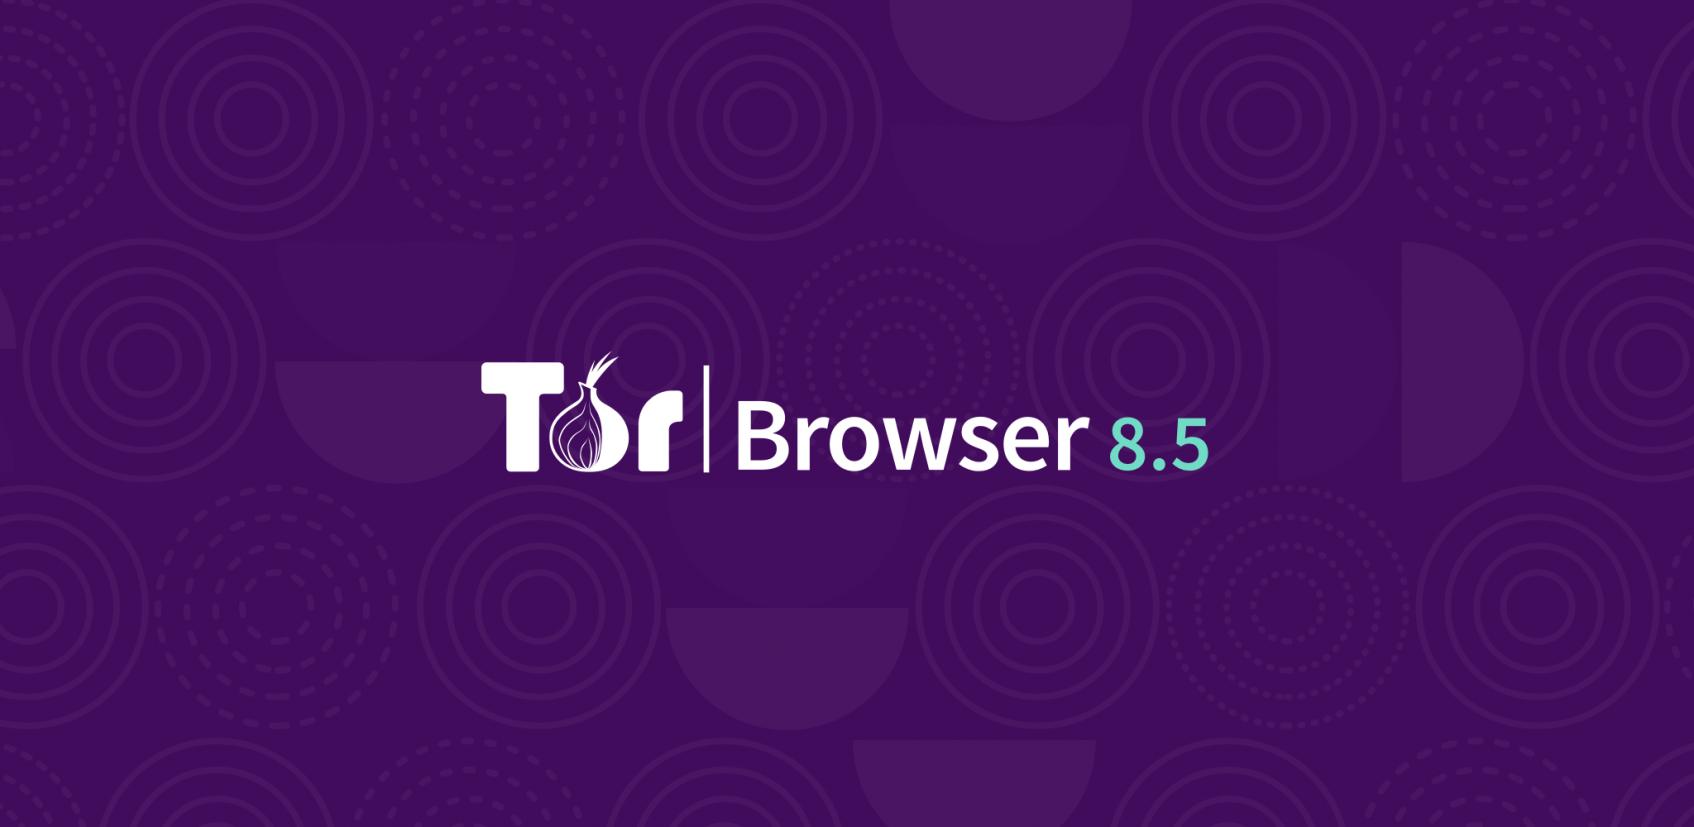 tor browser services gydra